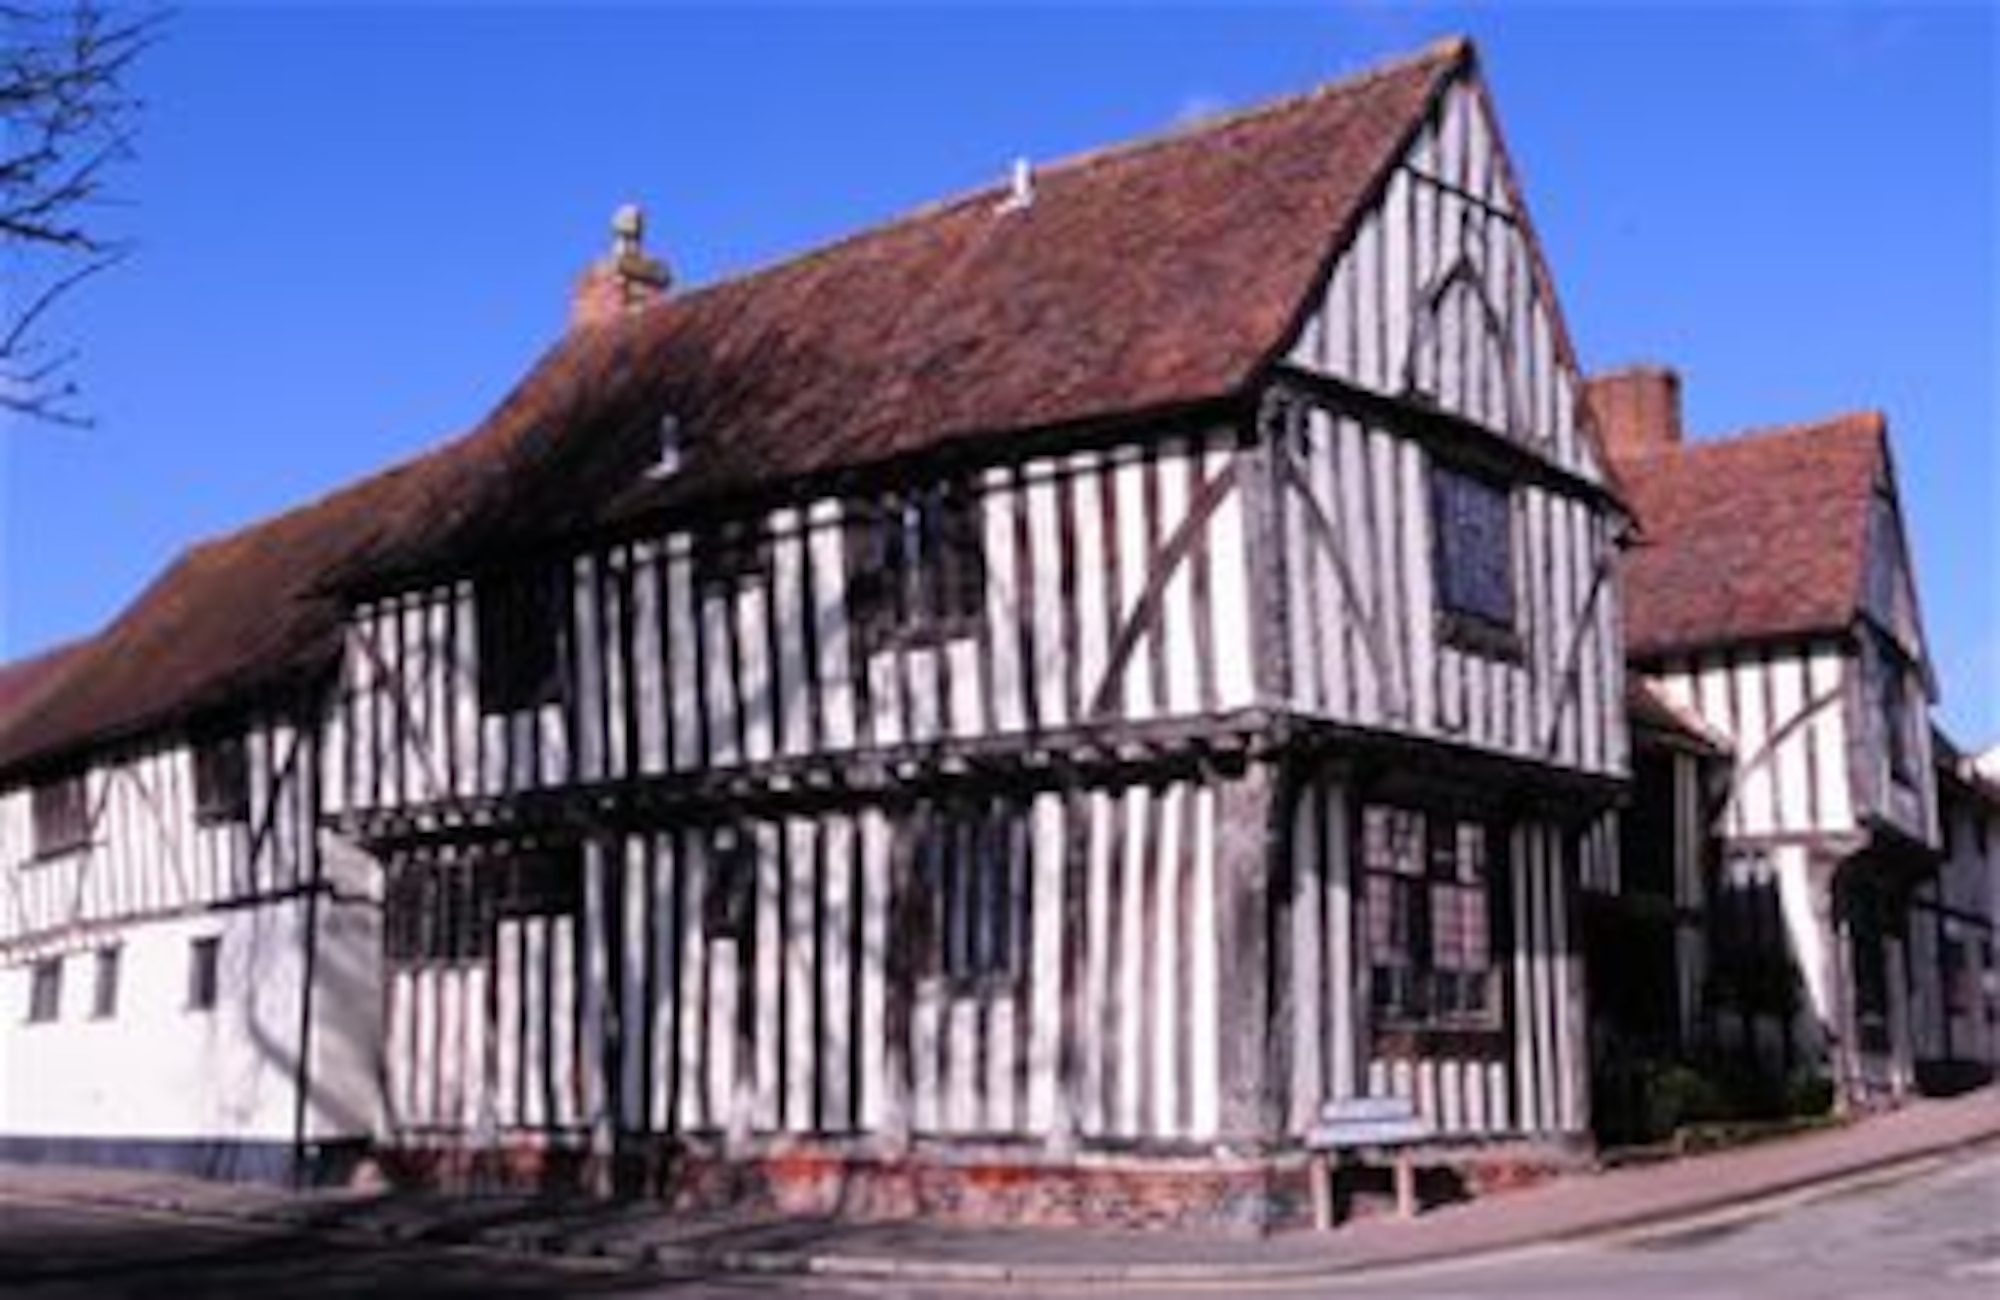 The Wool Hall in Lavenham, Suffolk, is one of many half-timbered buildings in the town and is a tribute to the source of the English wool trade. During the Middle Ages, Lavenham was well known in the wool trade, and prosperous wool merchants are responsible for most of the town's memorable buildings. The picturesque town is quintessentially English. Cafes, antique shops, small boutiques and those selling fresh, local produce are all located along the High Street. (U.S. Air Force photo by Karen Abeyasekere/Released)